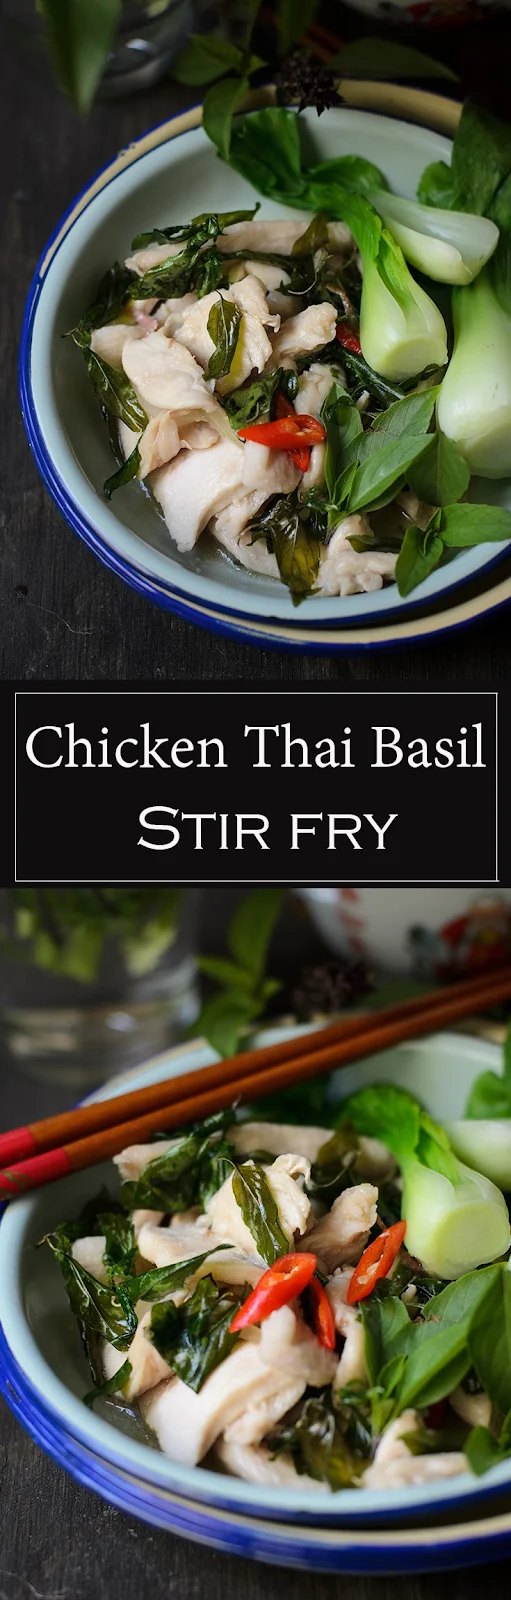 Quick Chicken Thai Basil Stir-fry for the busy mid-week quick dinner.